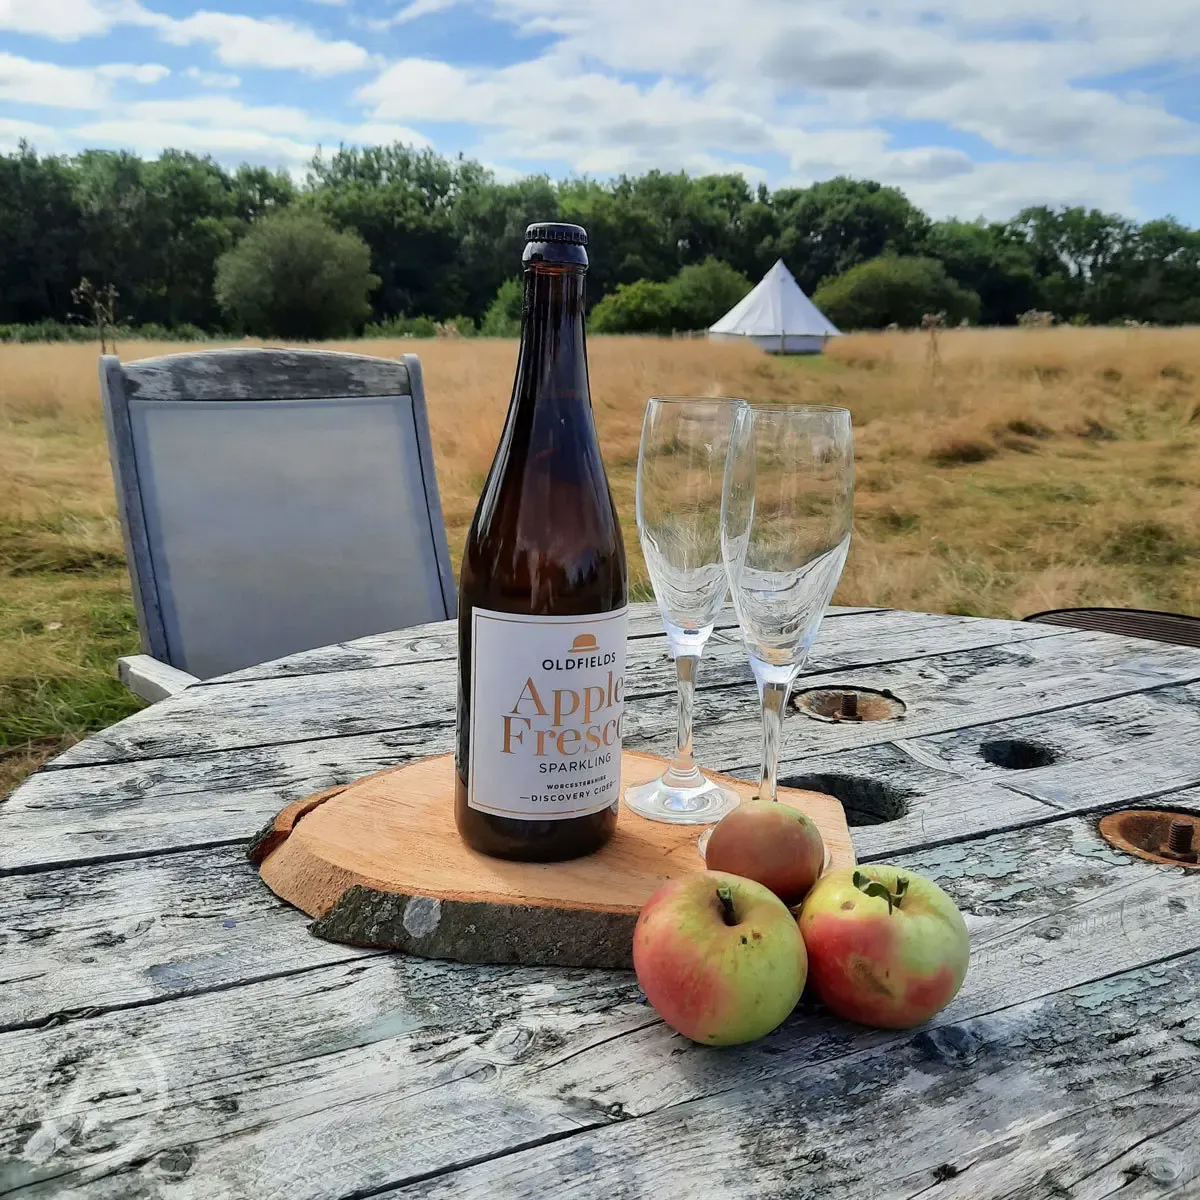 Apple cider outside the bell tent